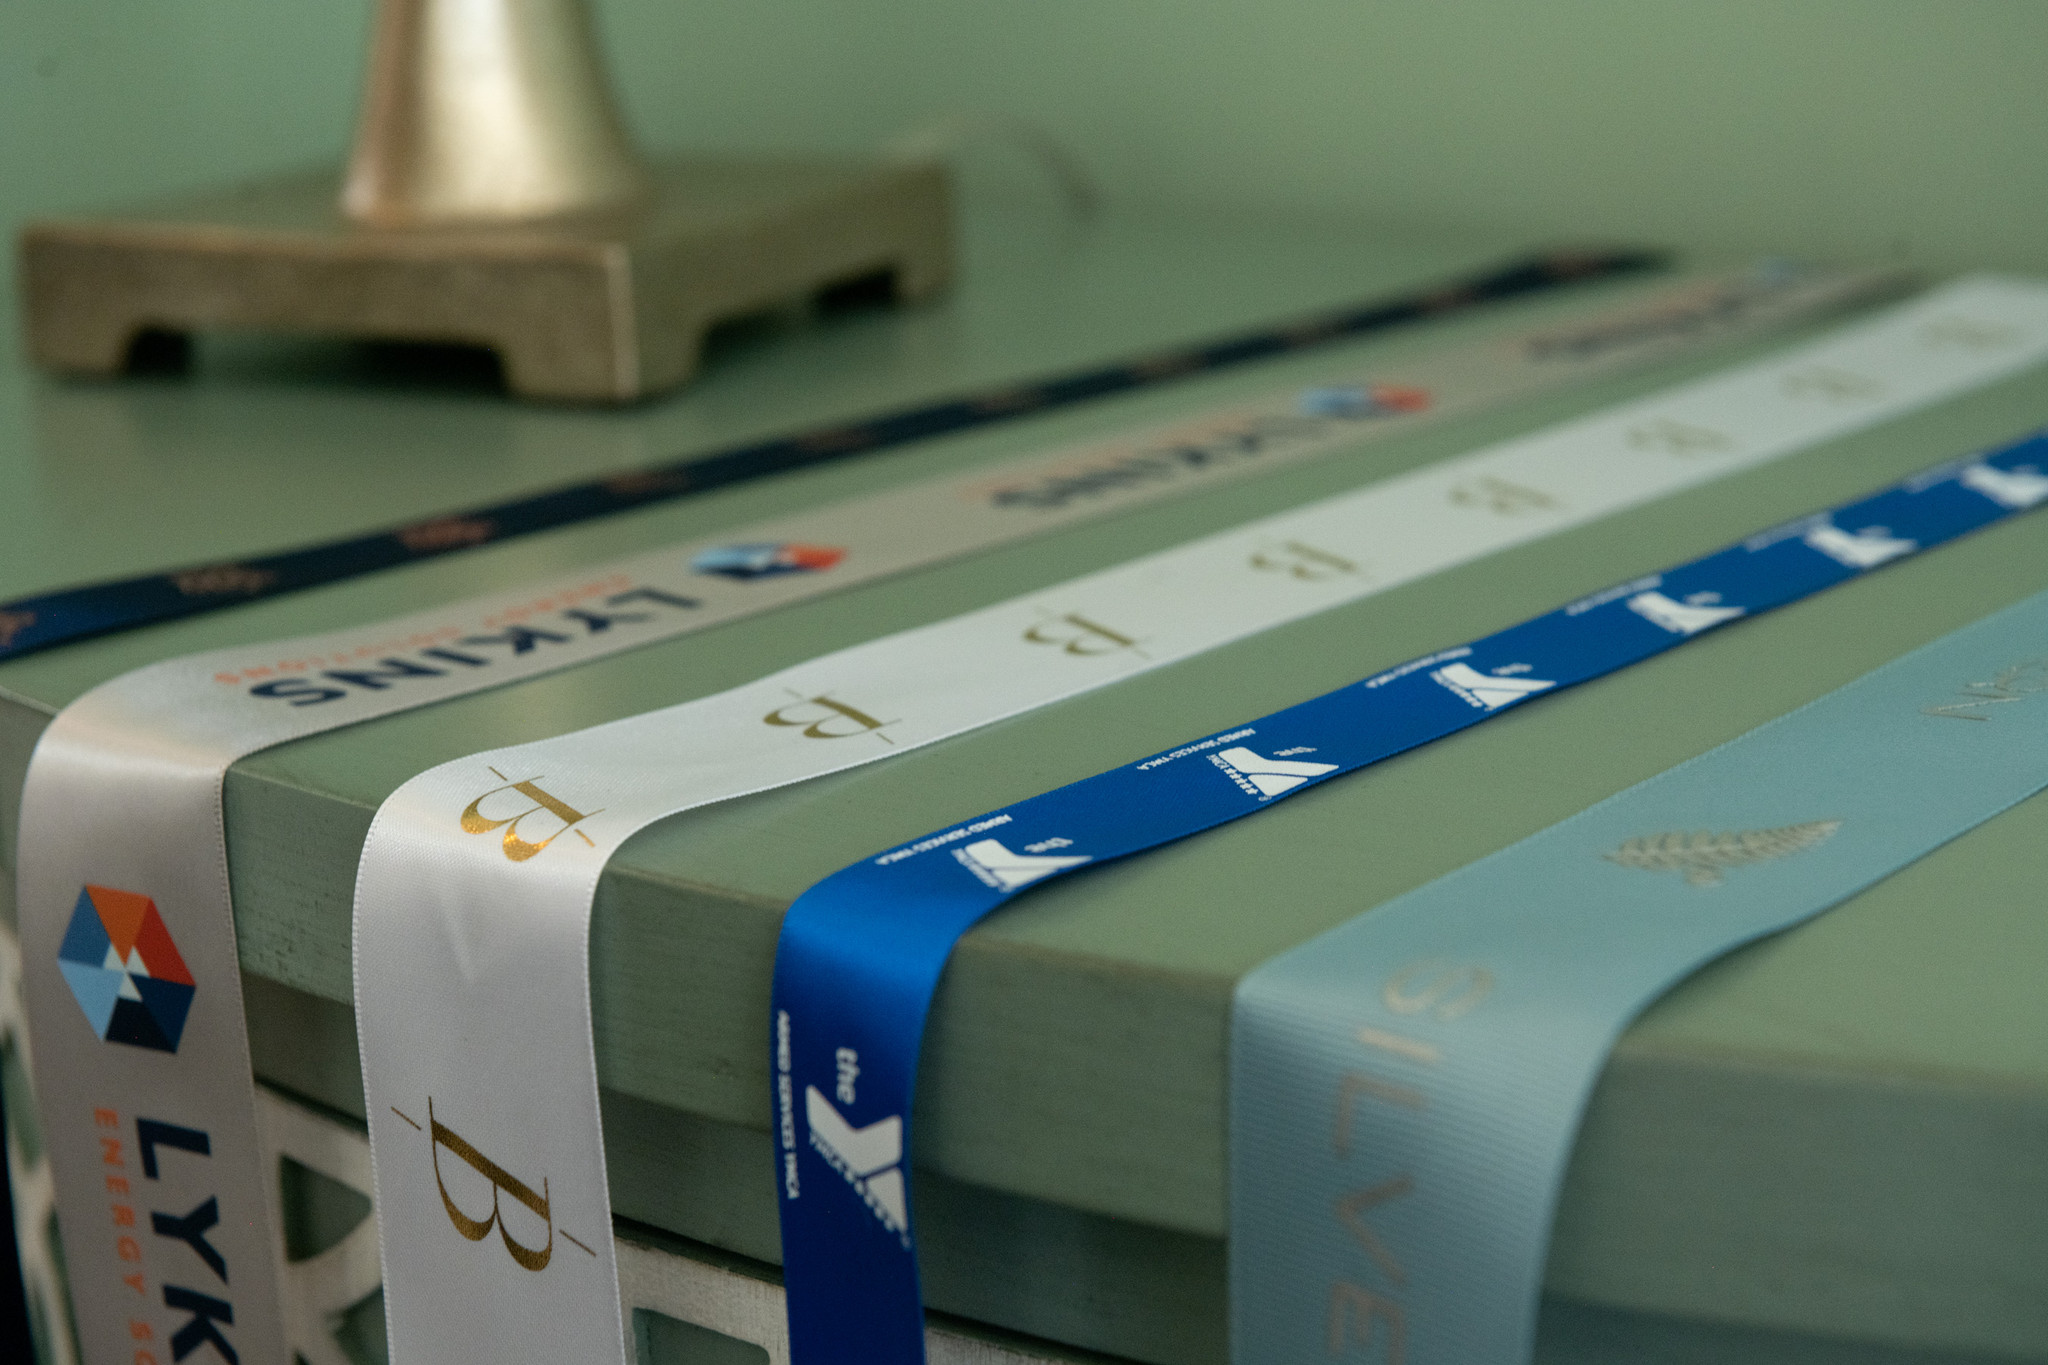 Tips for Designing an Eye-Catching Logo Ribbon: Select High-Quality Materials